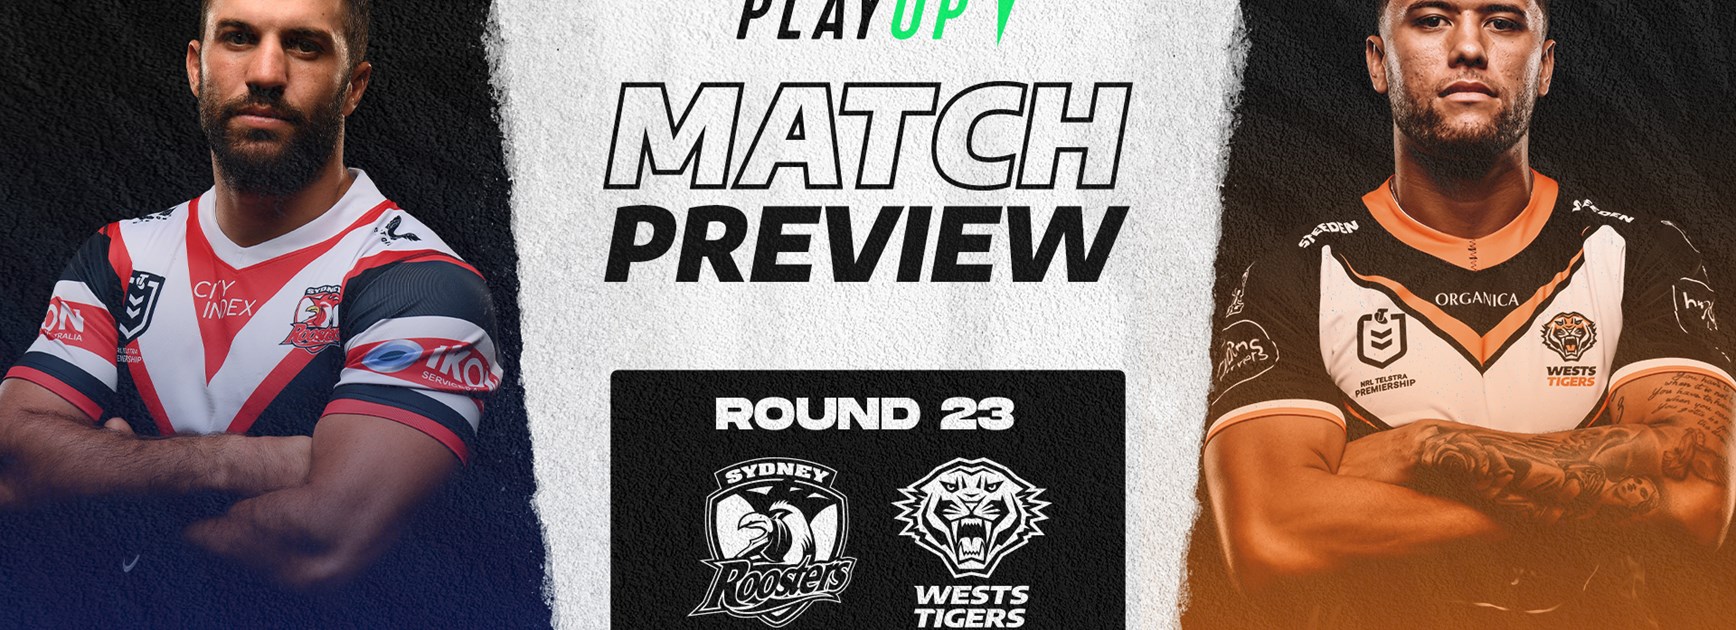 Match Preview: Round 23 vs Sydney Roosters